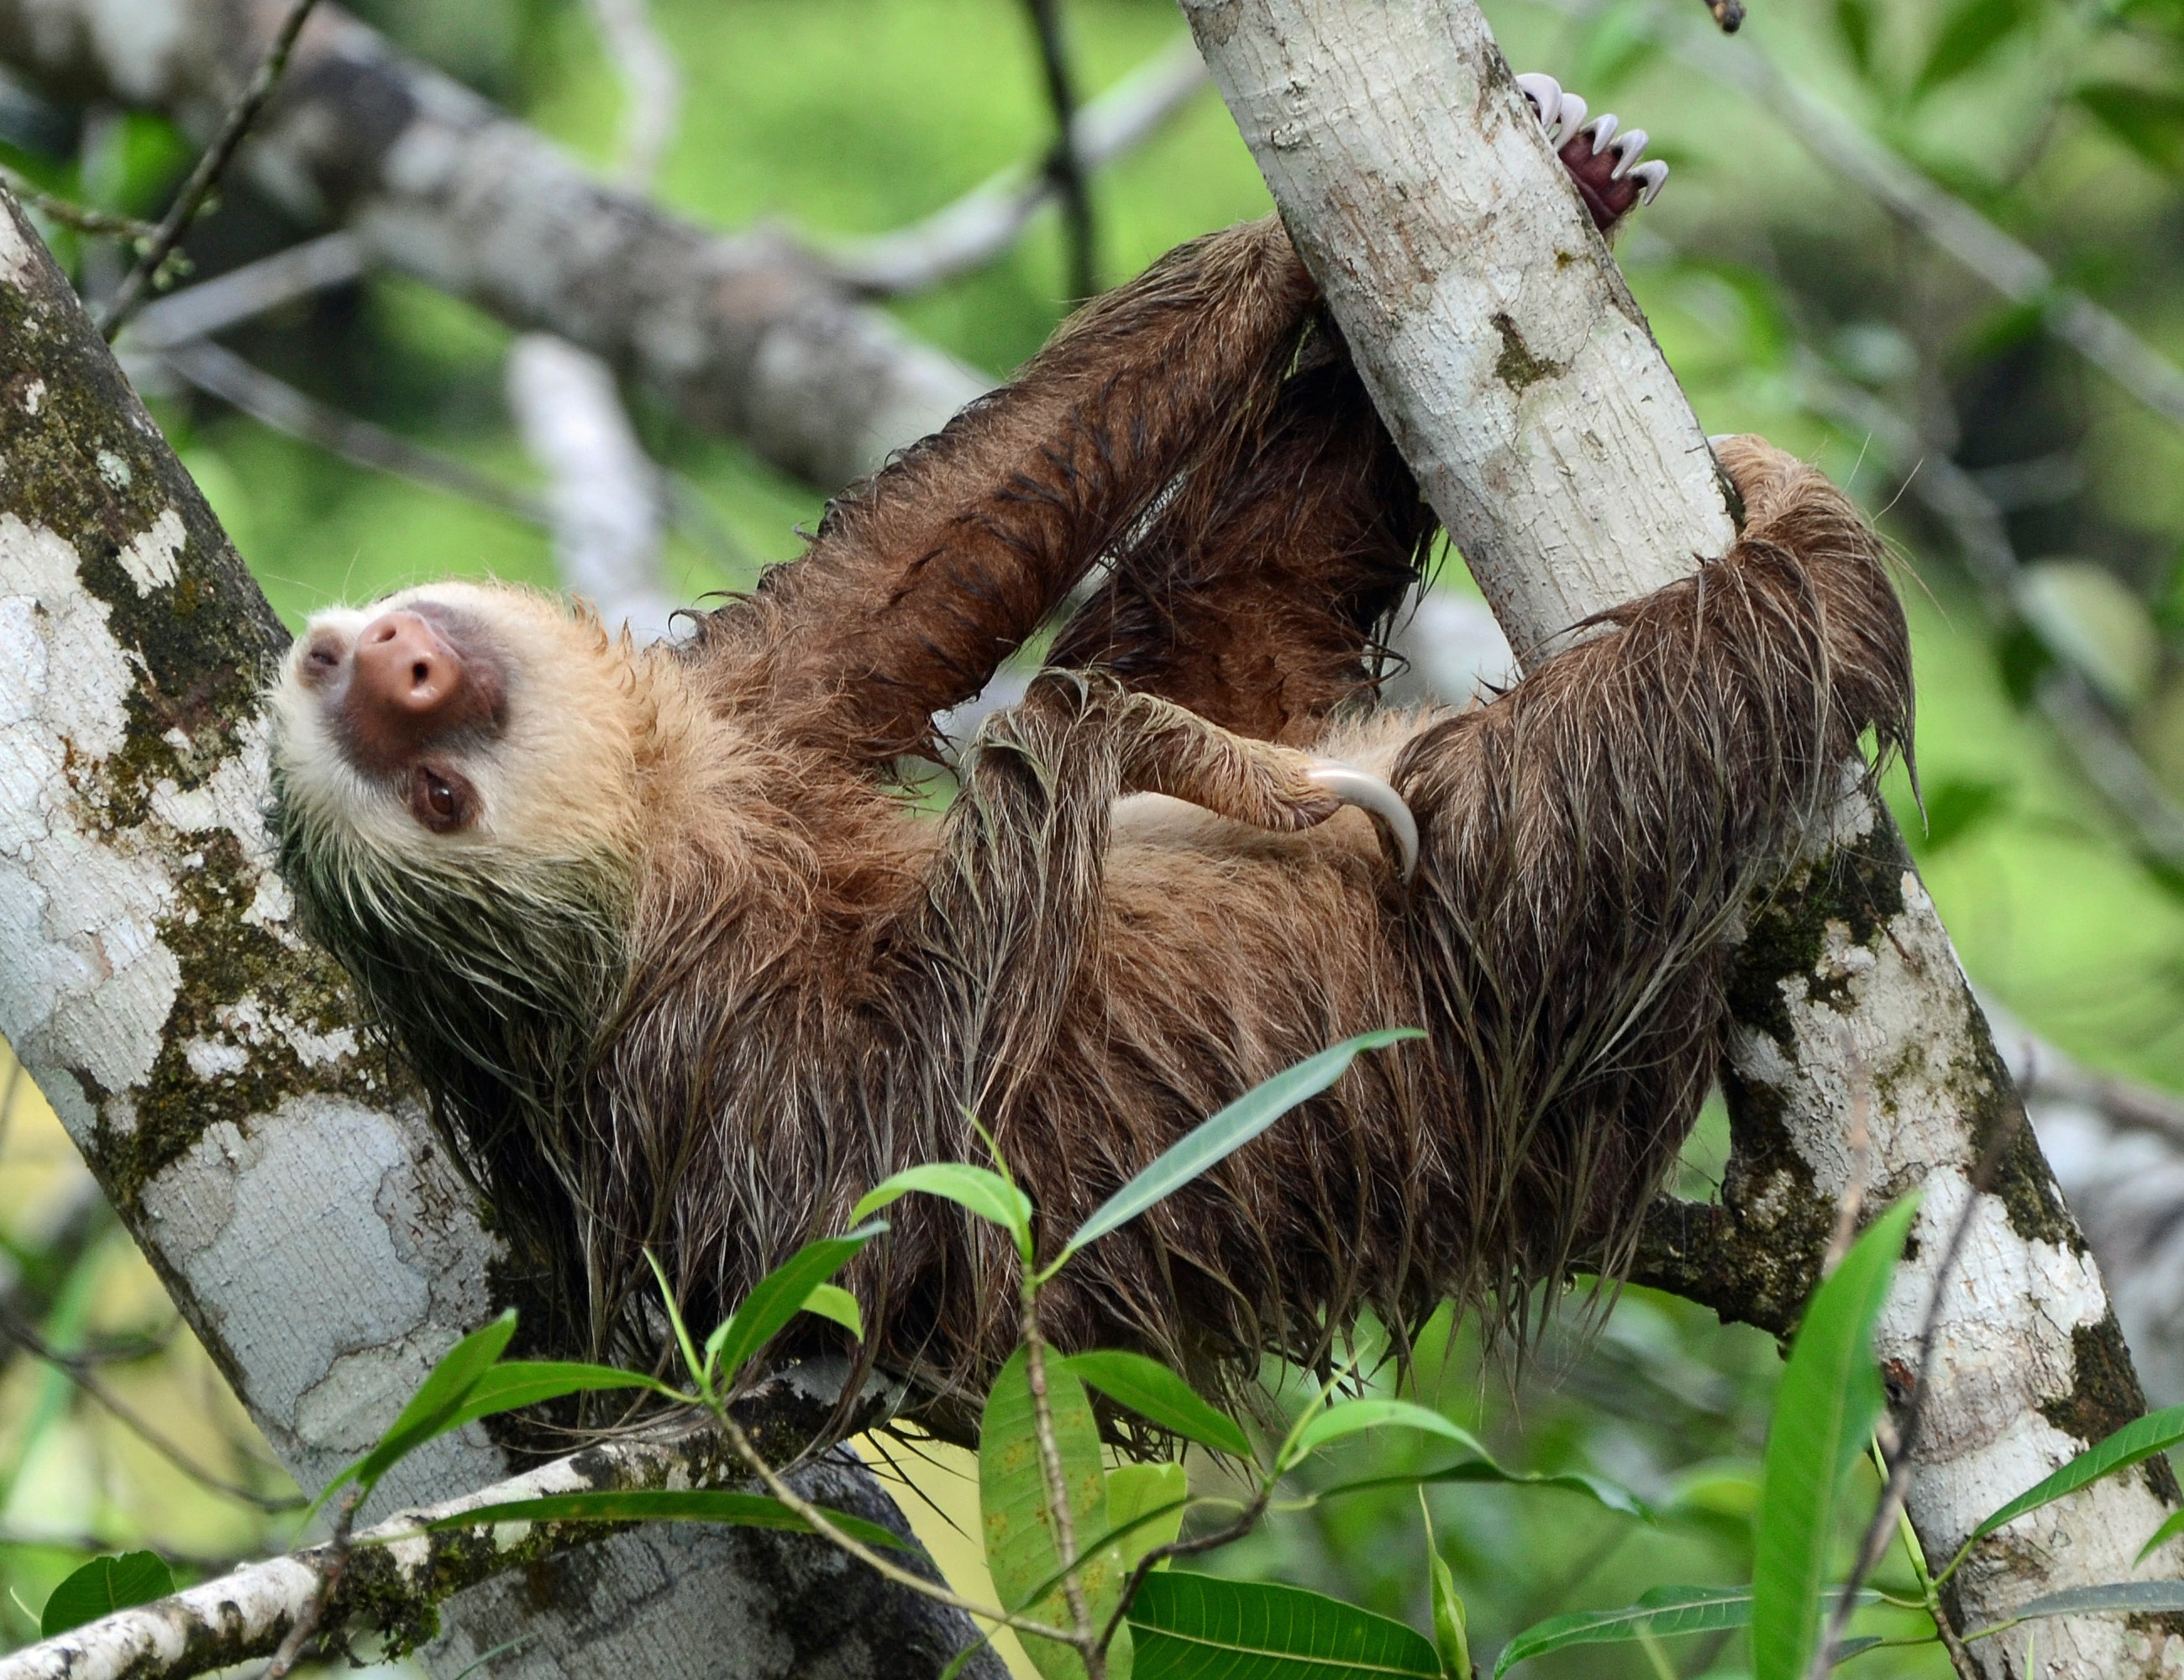 Putting the sloth in sloths: Arboreal lifestyle drives slow pace- All Image. NSF Science Foundation